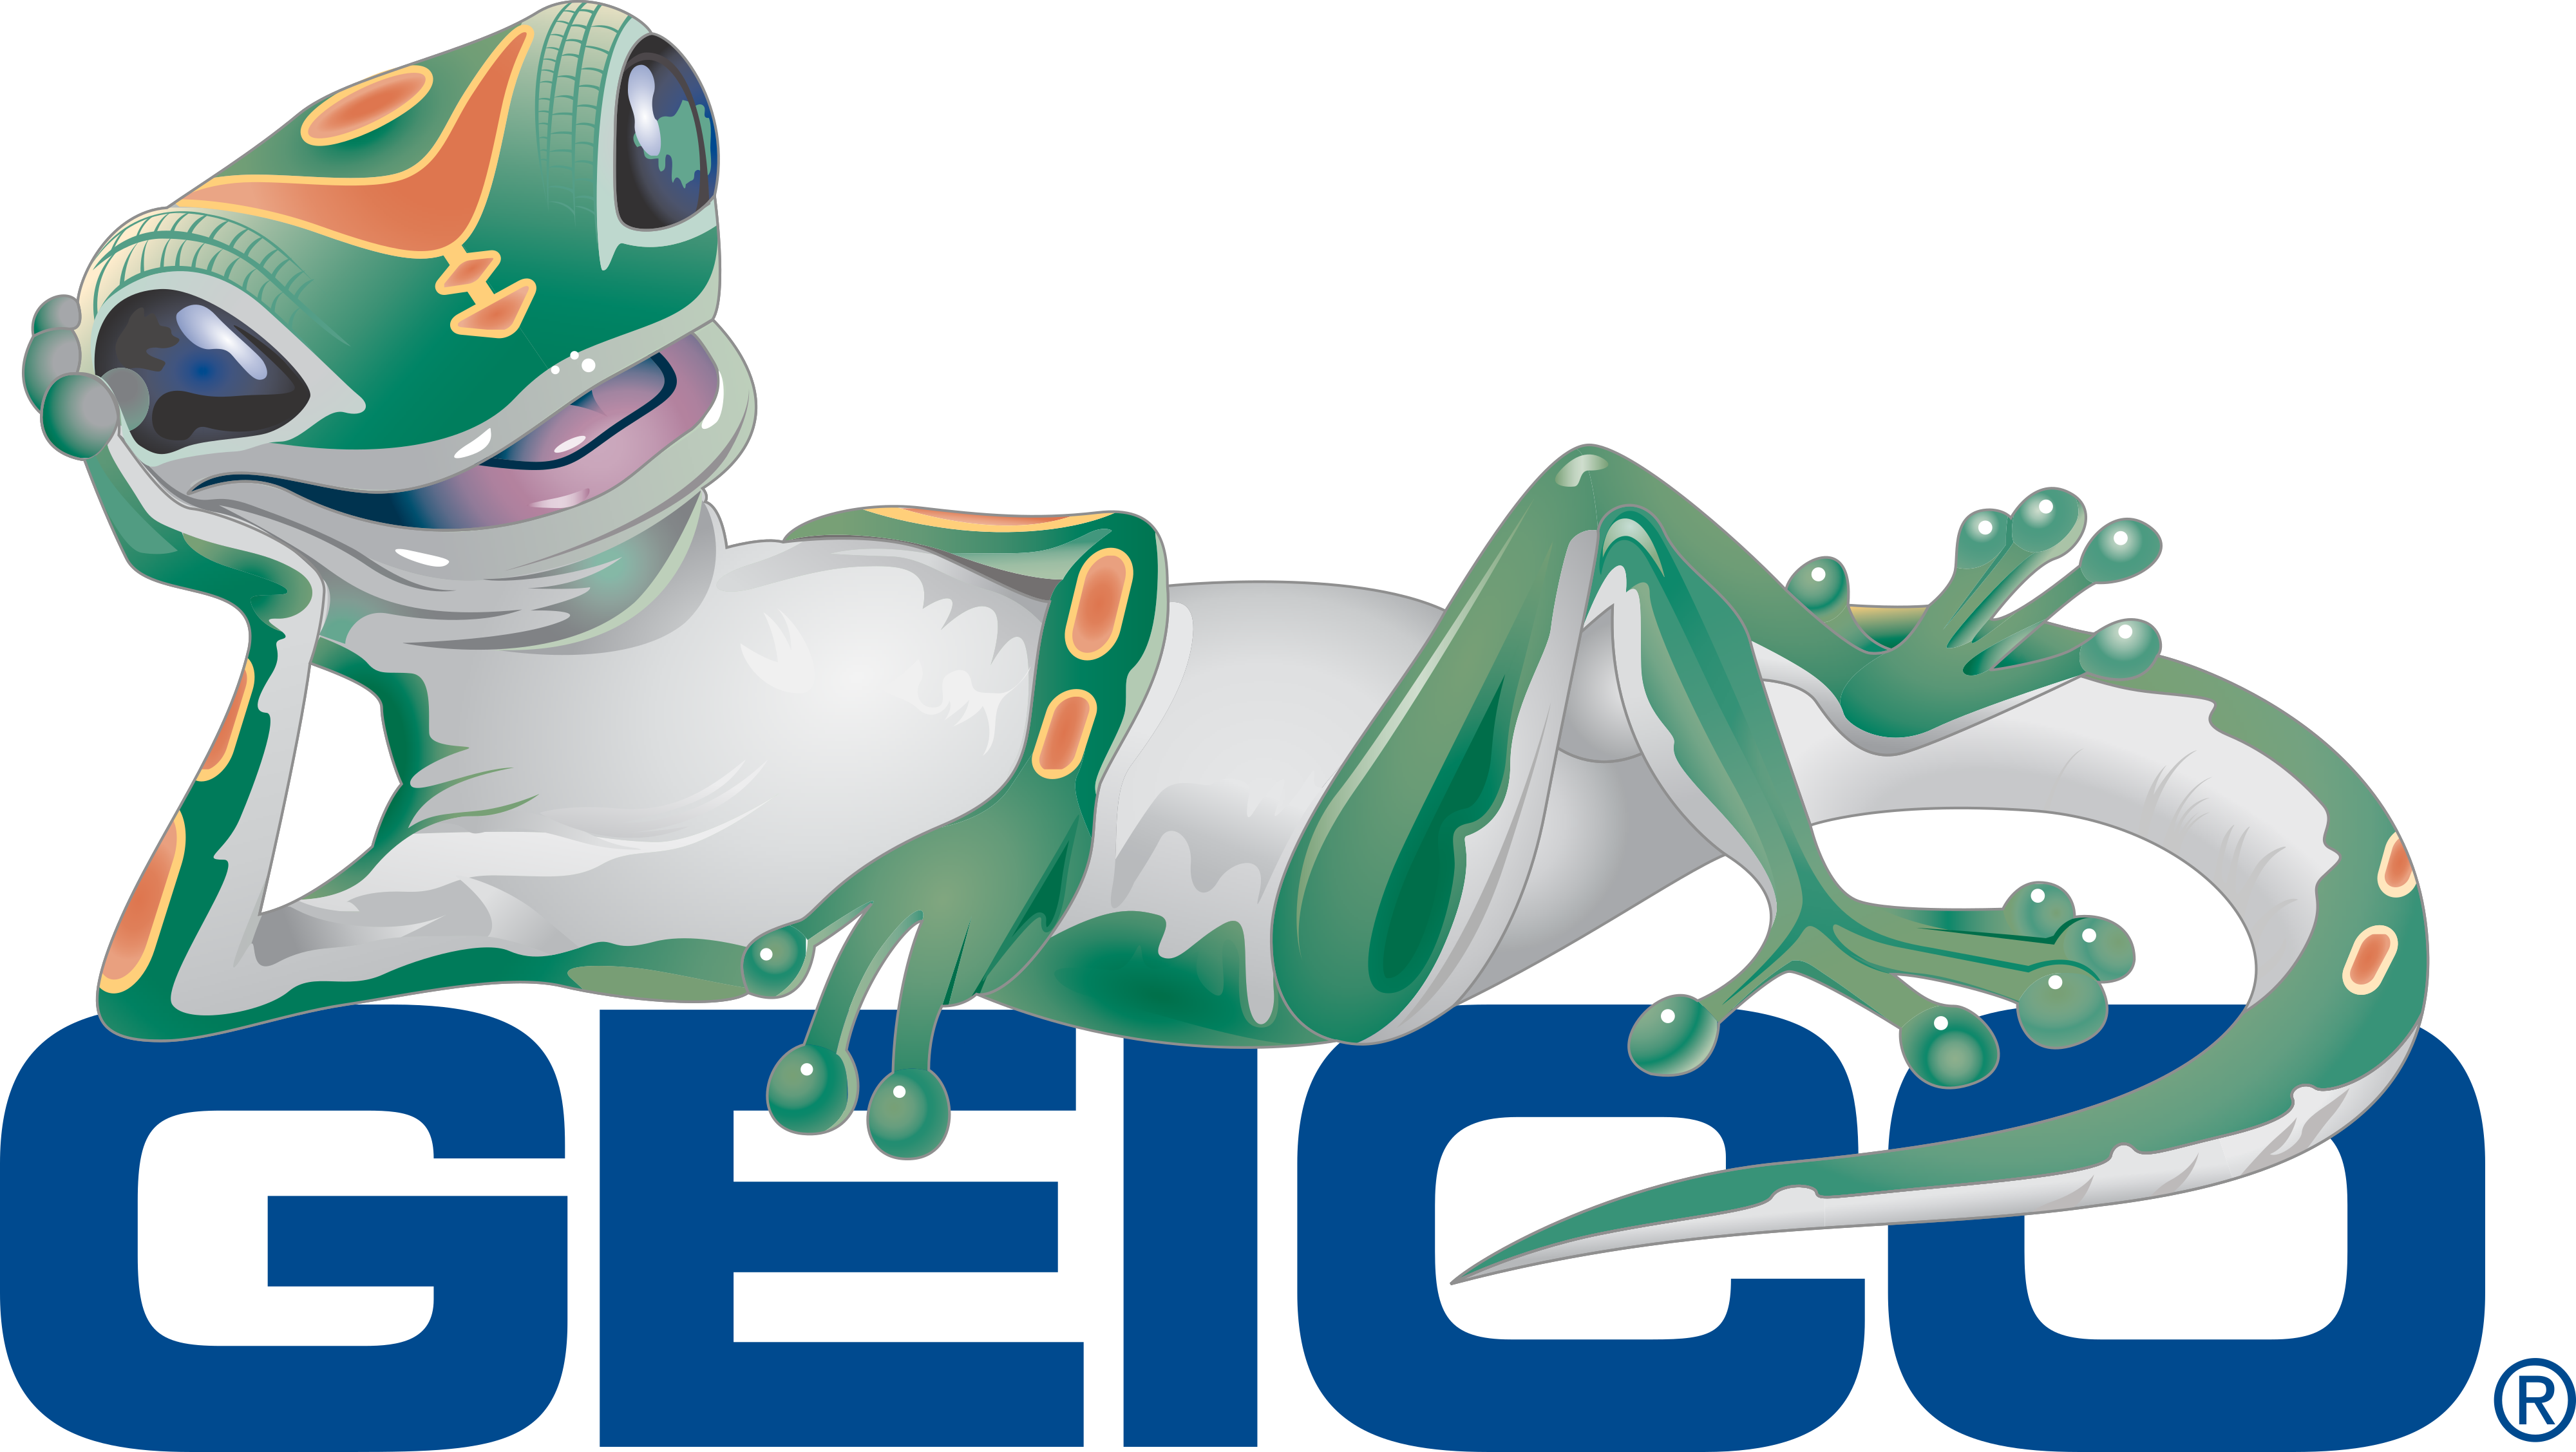 Geico Logo Png Hd Isolated 4k Wallpapers Tinydecozone | Images and ...